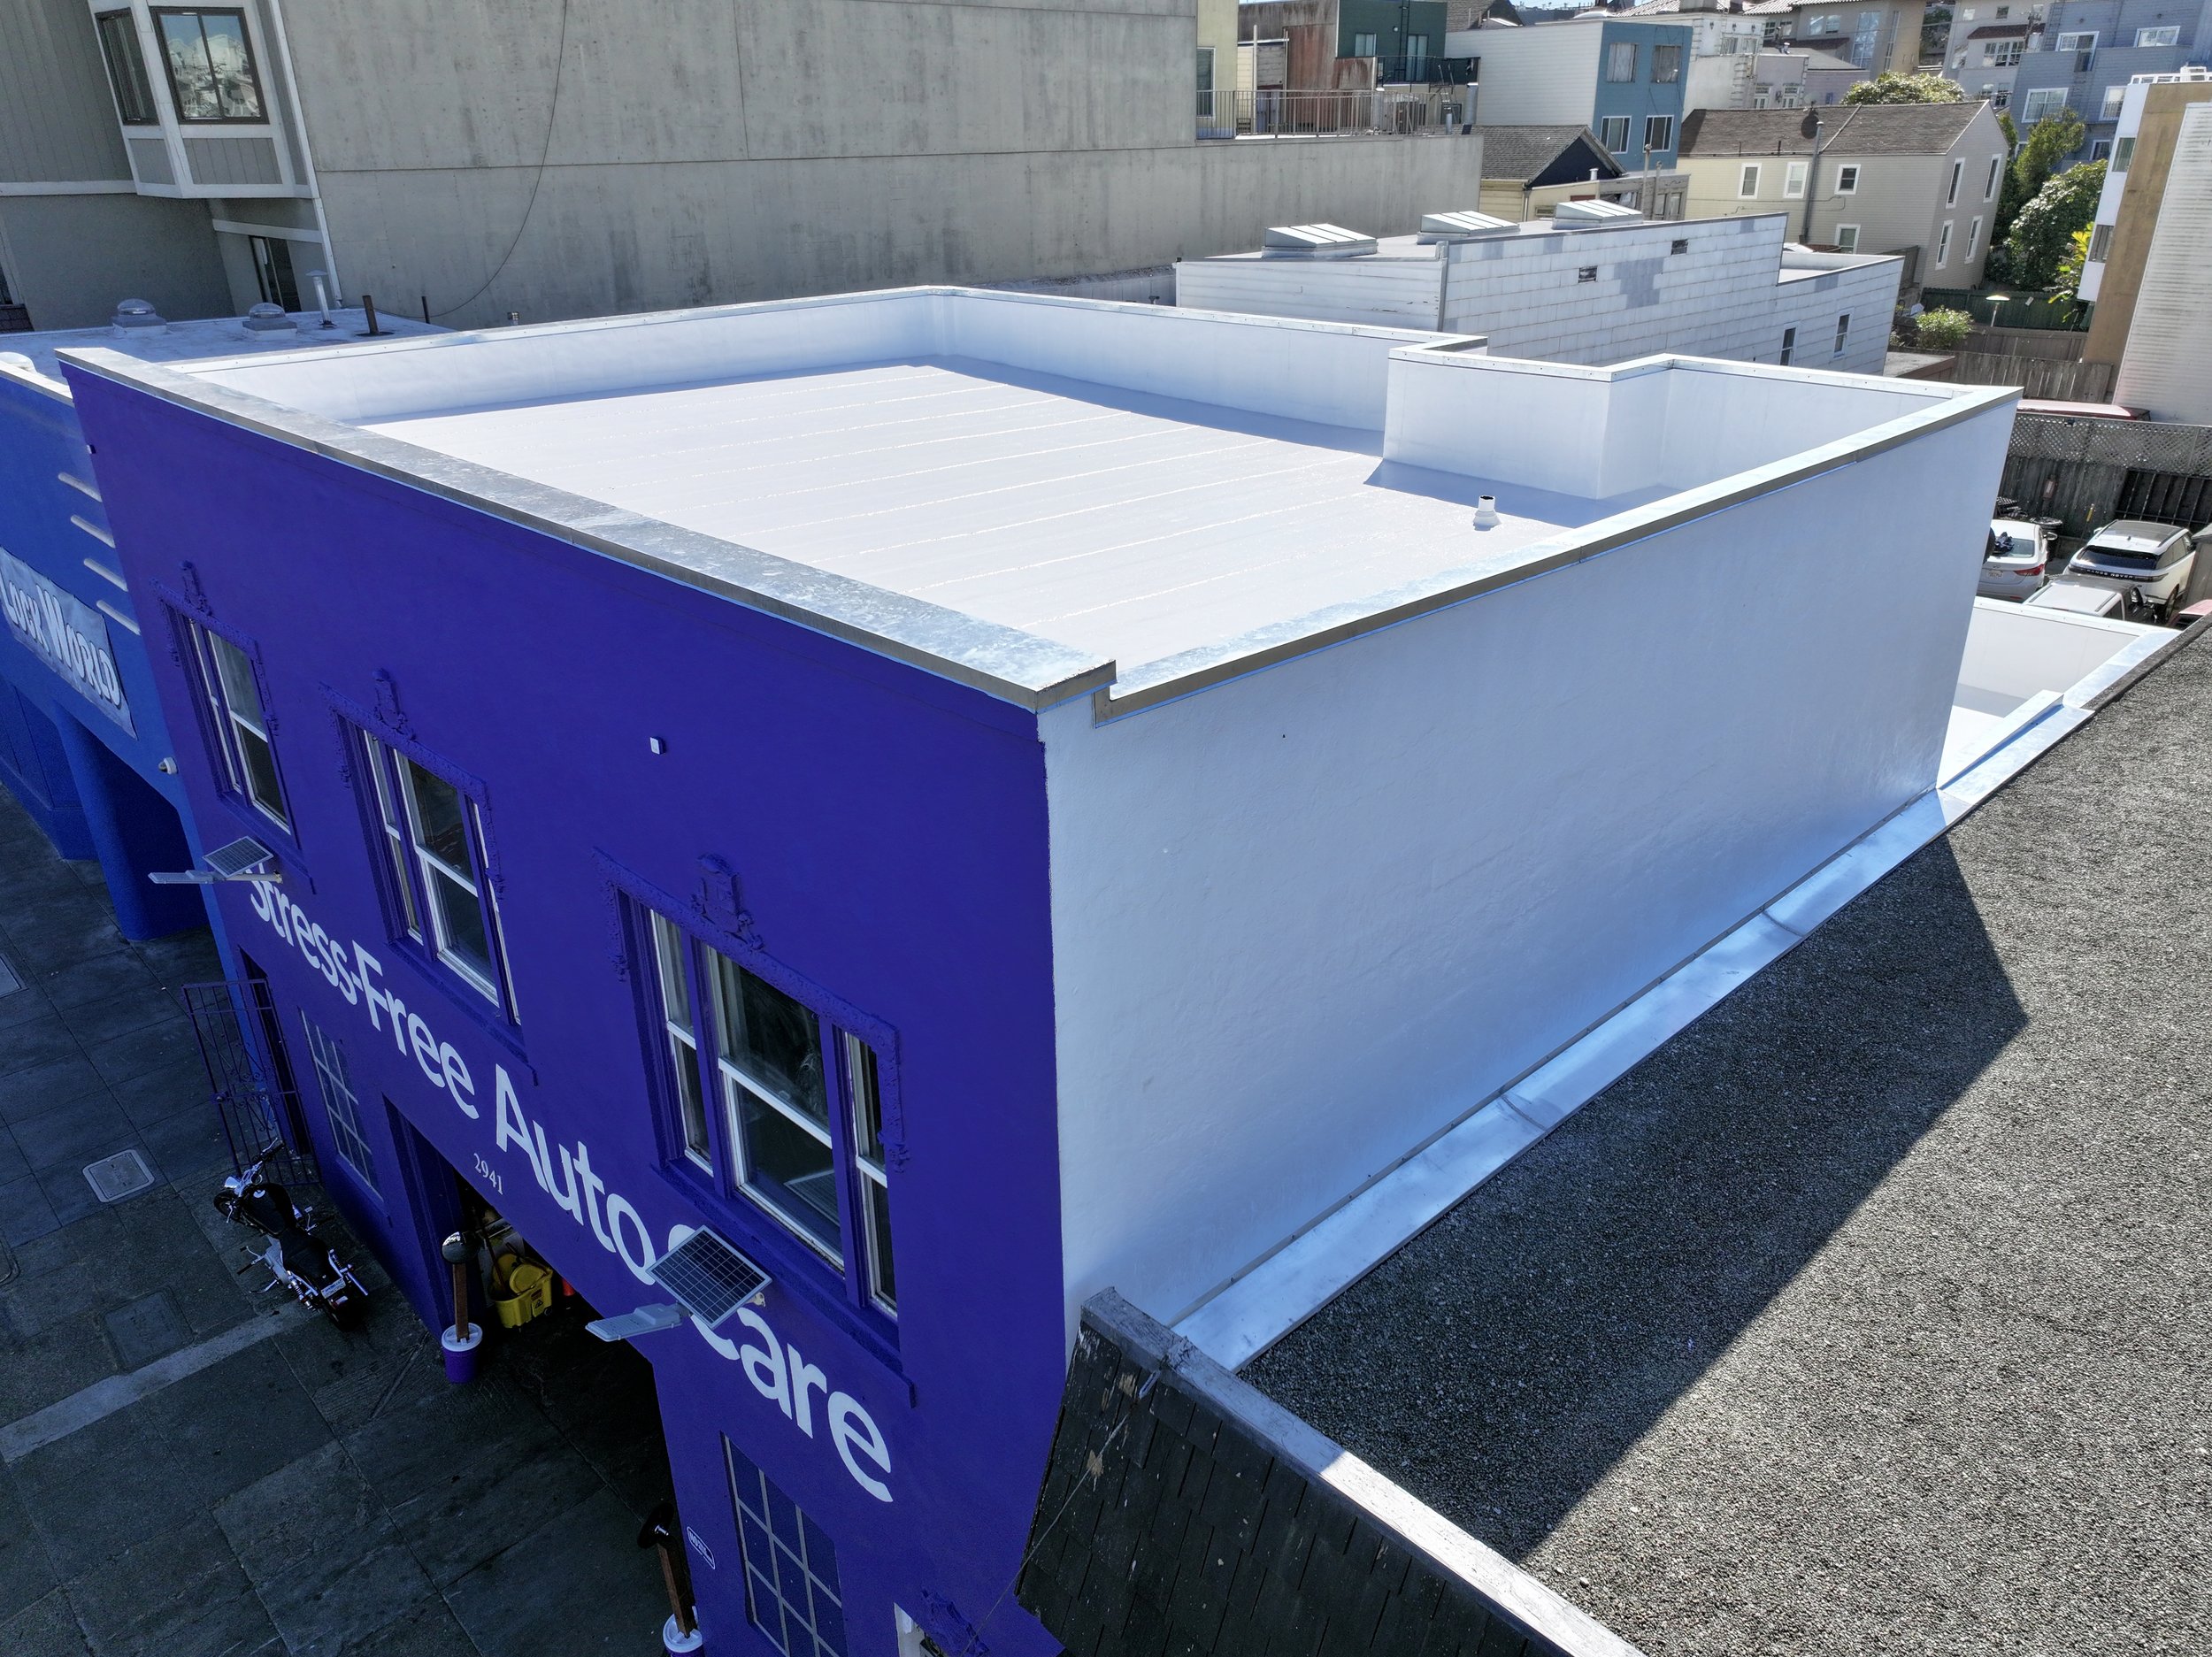 Siliconized-Coating-Top-Roof-And-Wall-Waterproofing.jpg